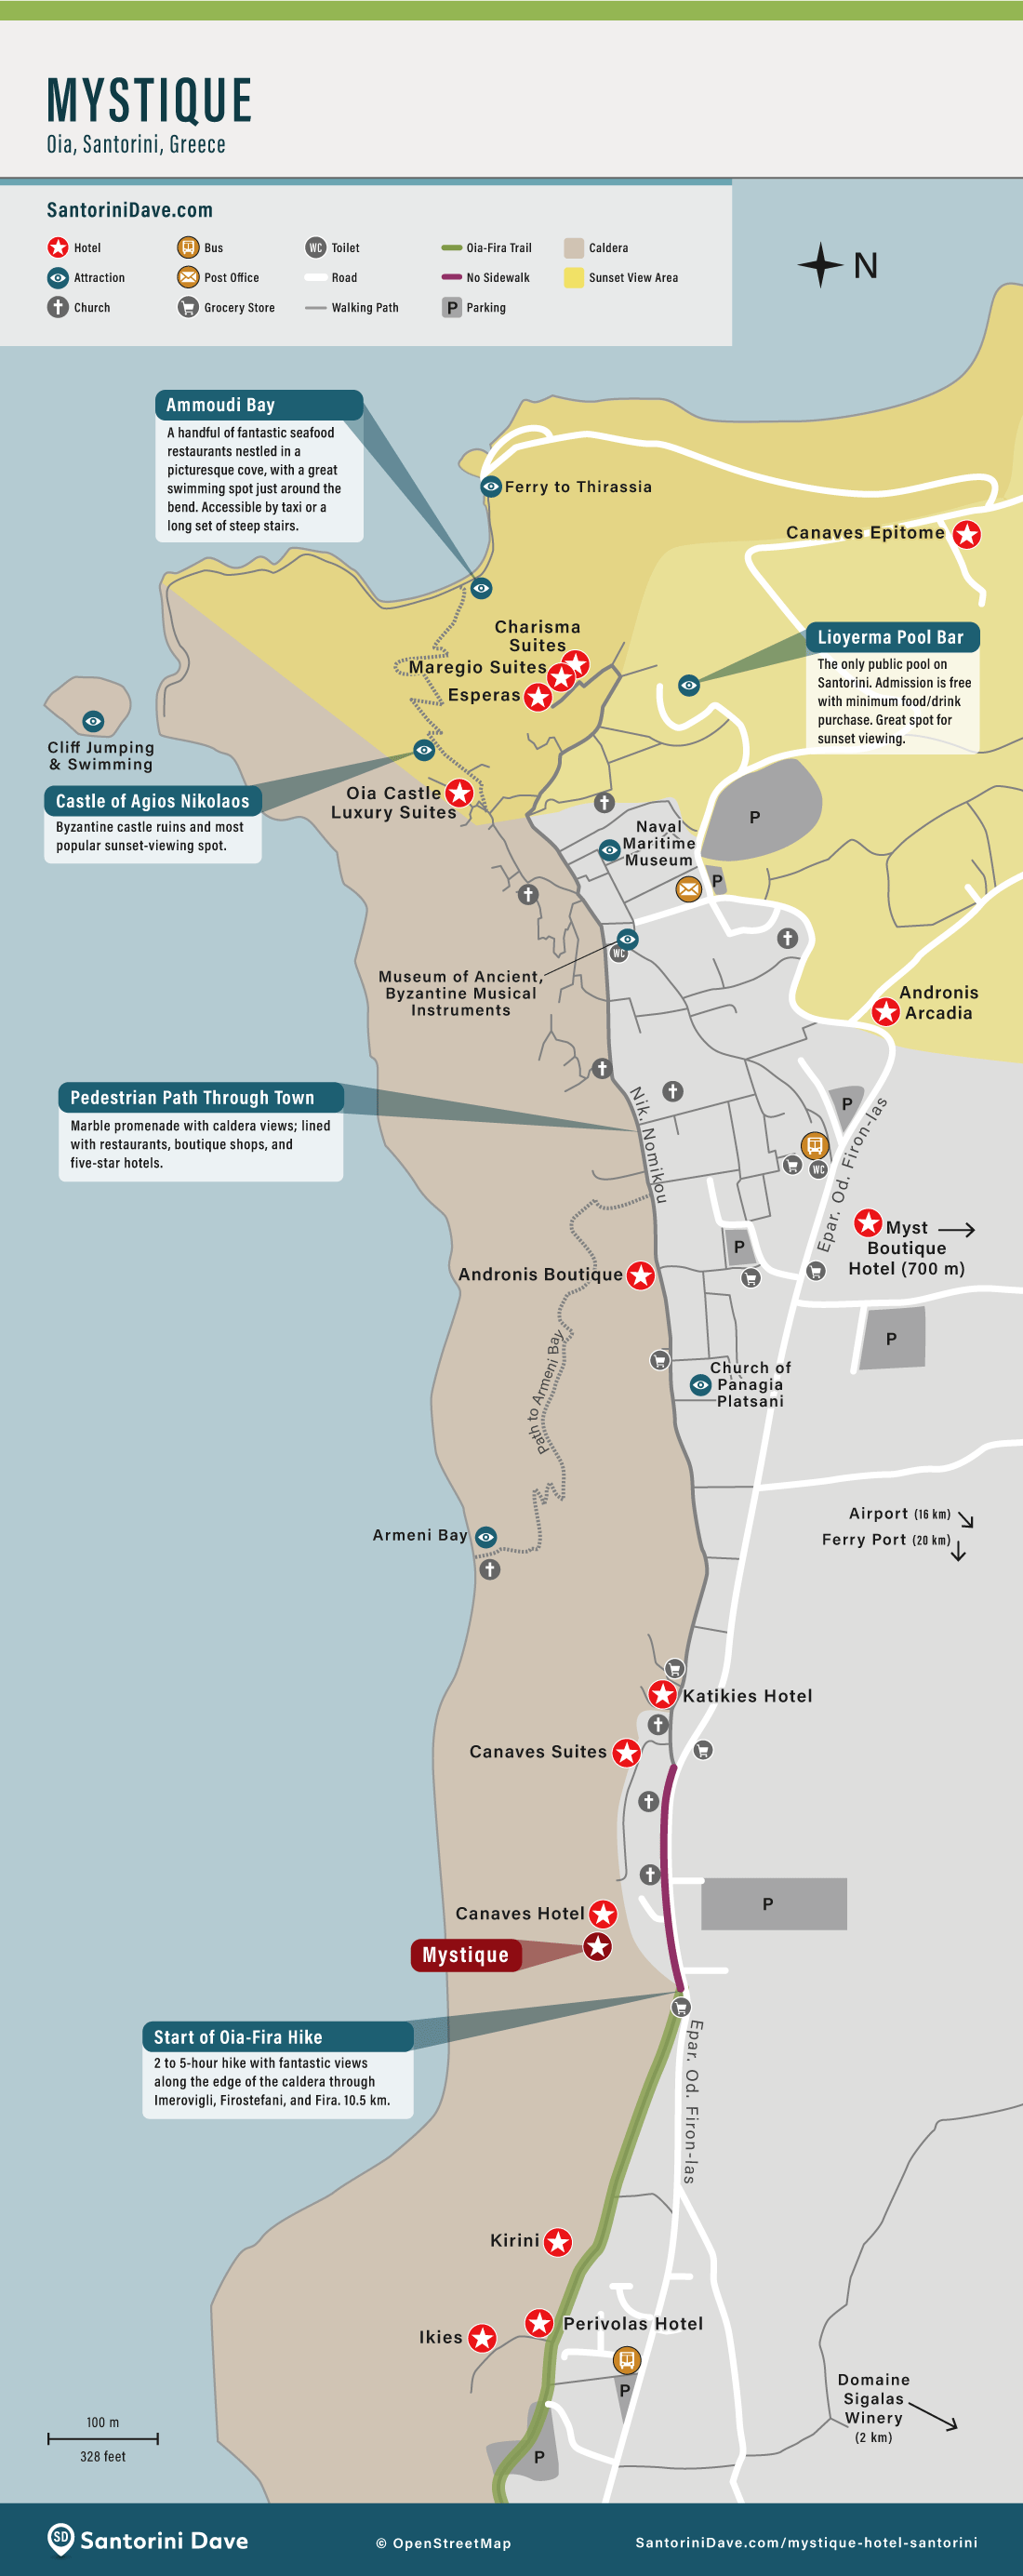 Map of Mystique Hotel's location and proximity to Ammoudi Bay, the Castle, and the walking path in Oia, Santorini, Greece.